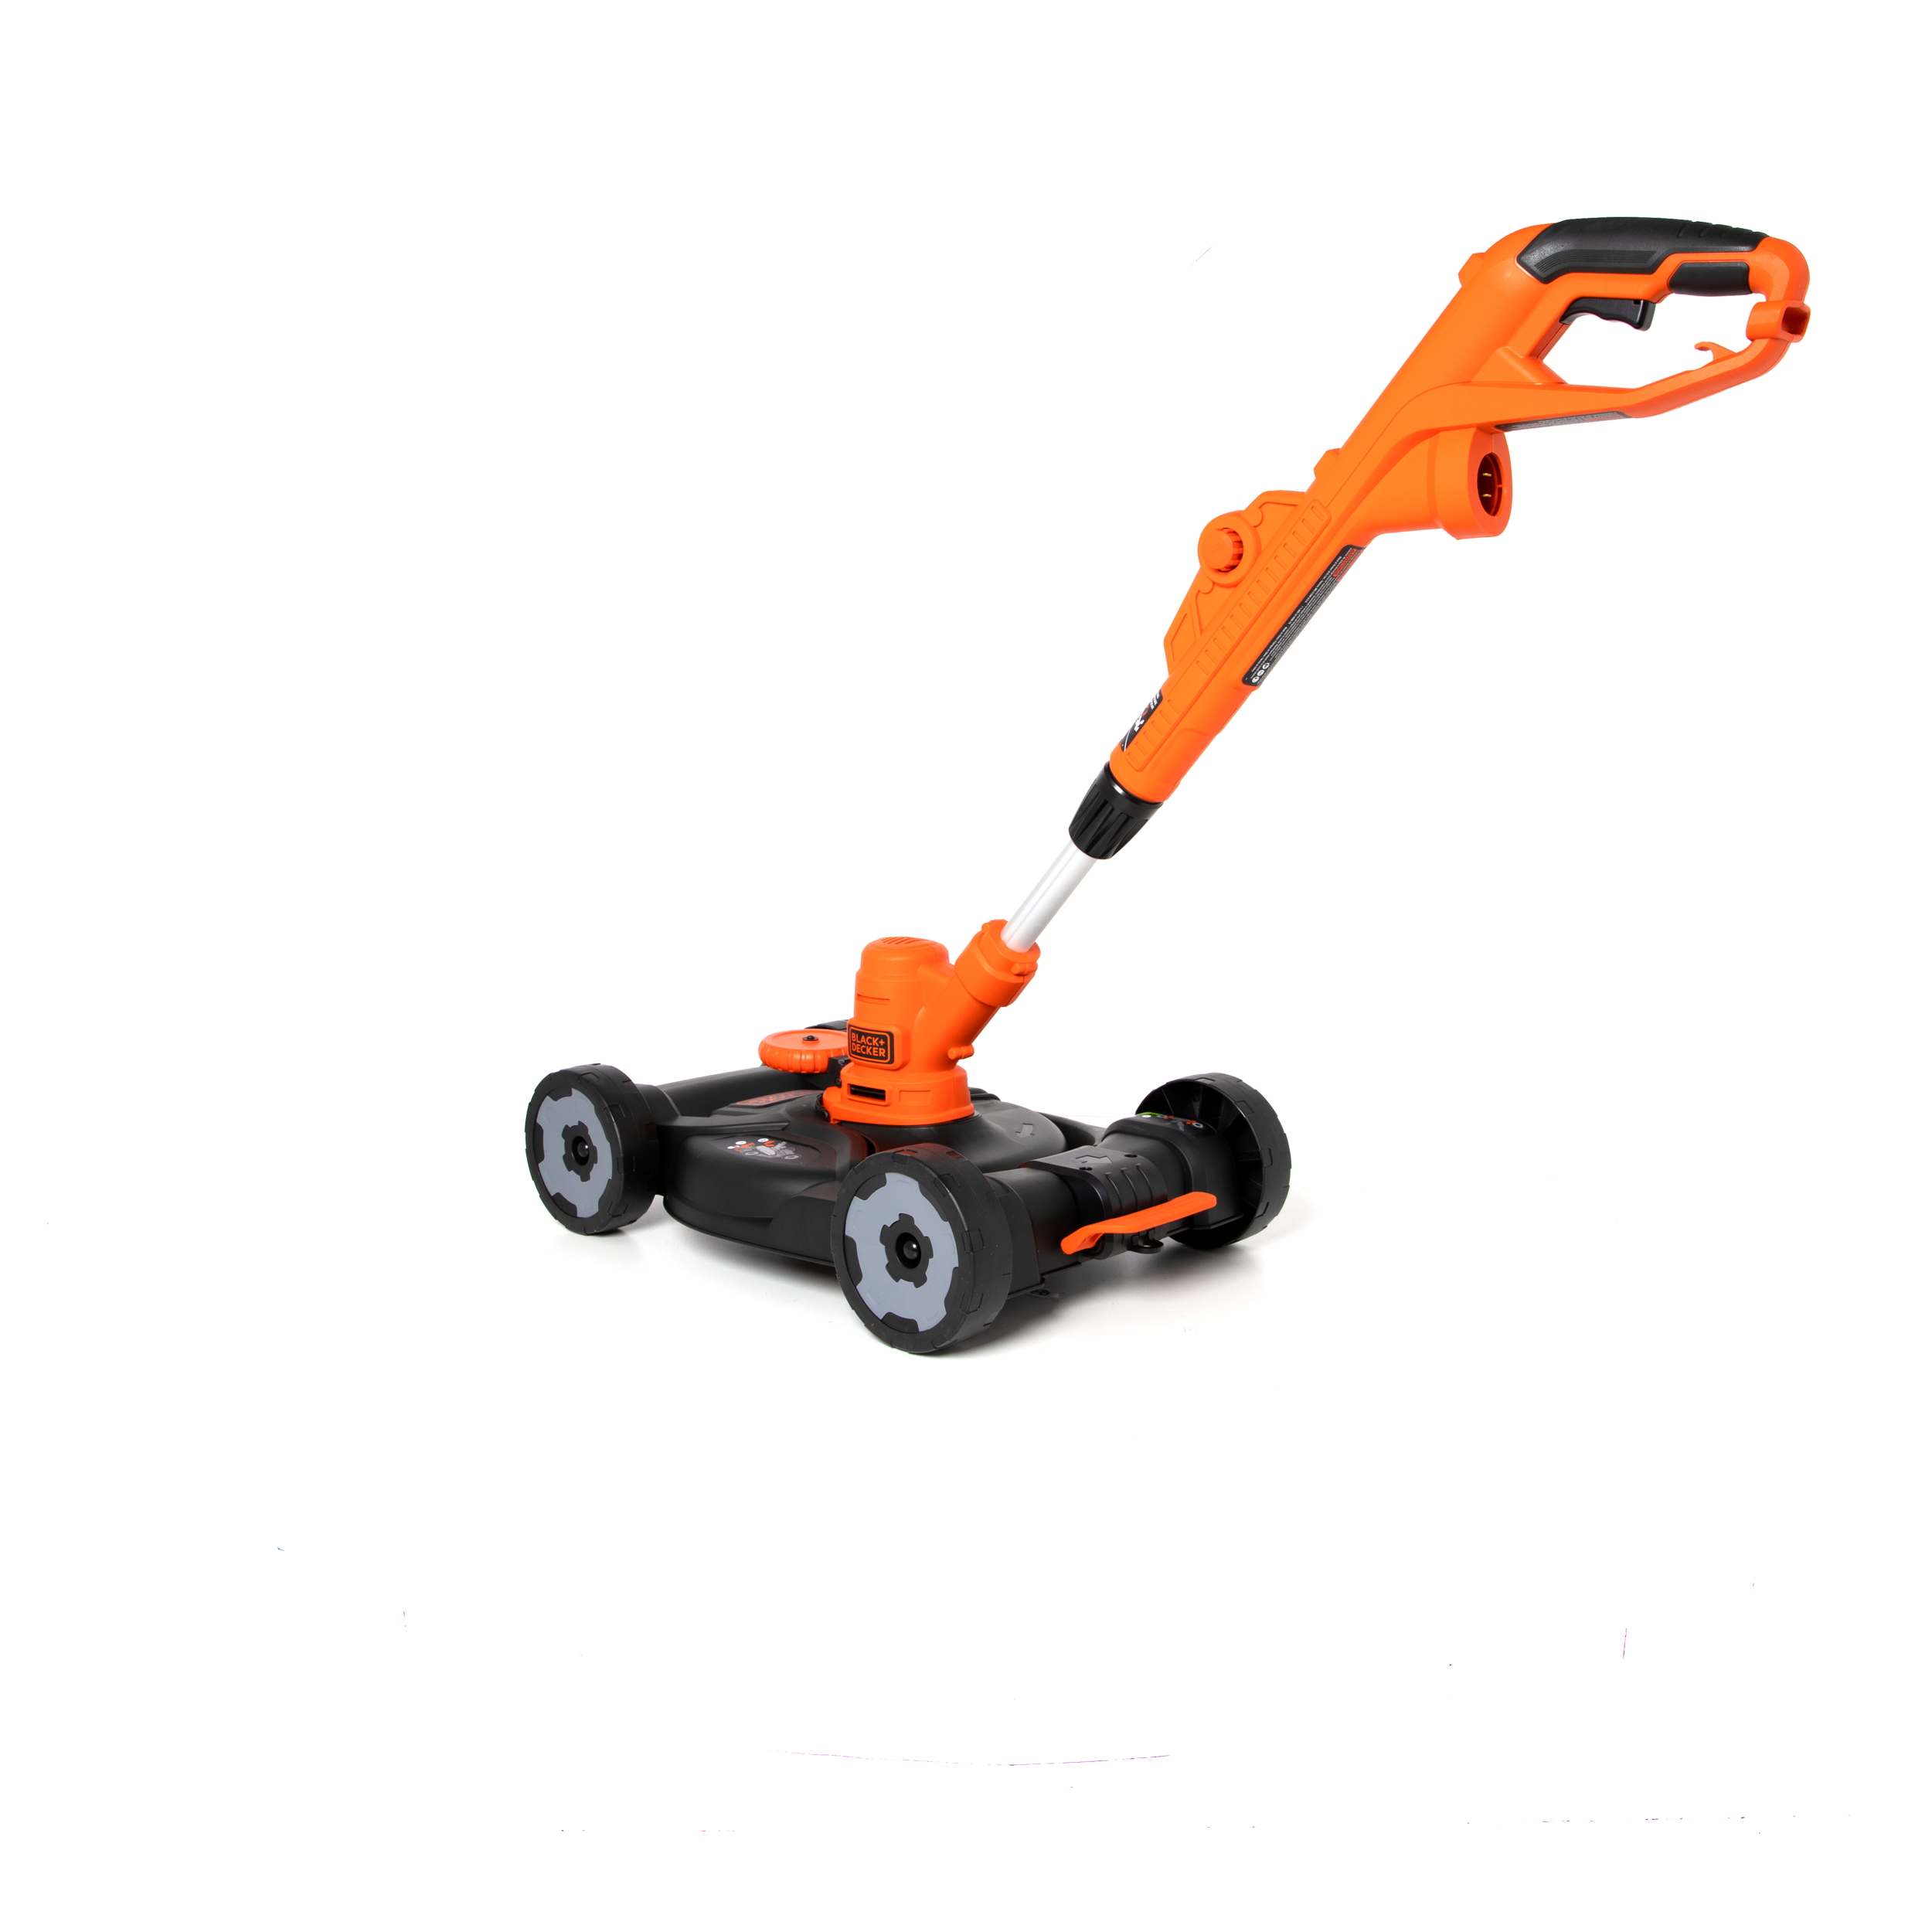 Review BLACK+DECKER BESTA512CM 12 3in1 Compact Electric Lawn Mower 2018 